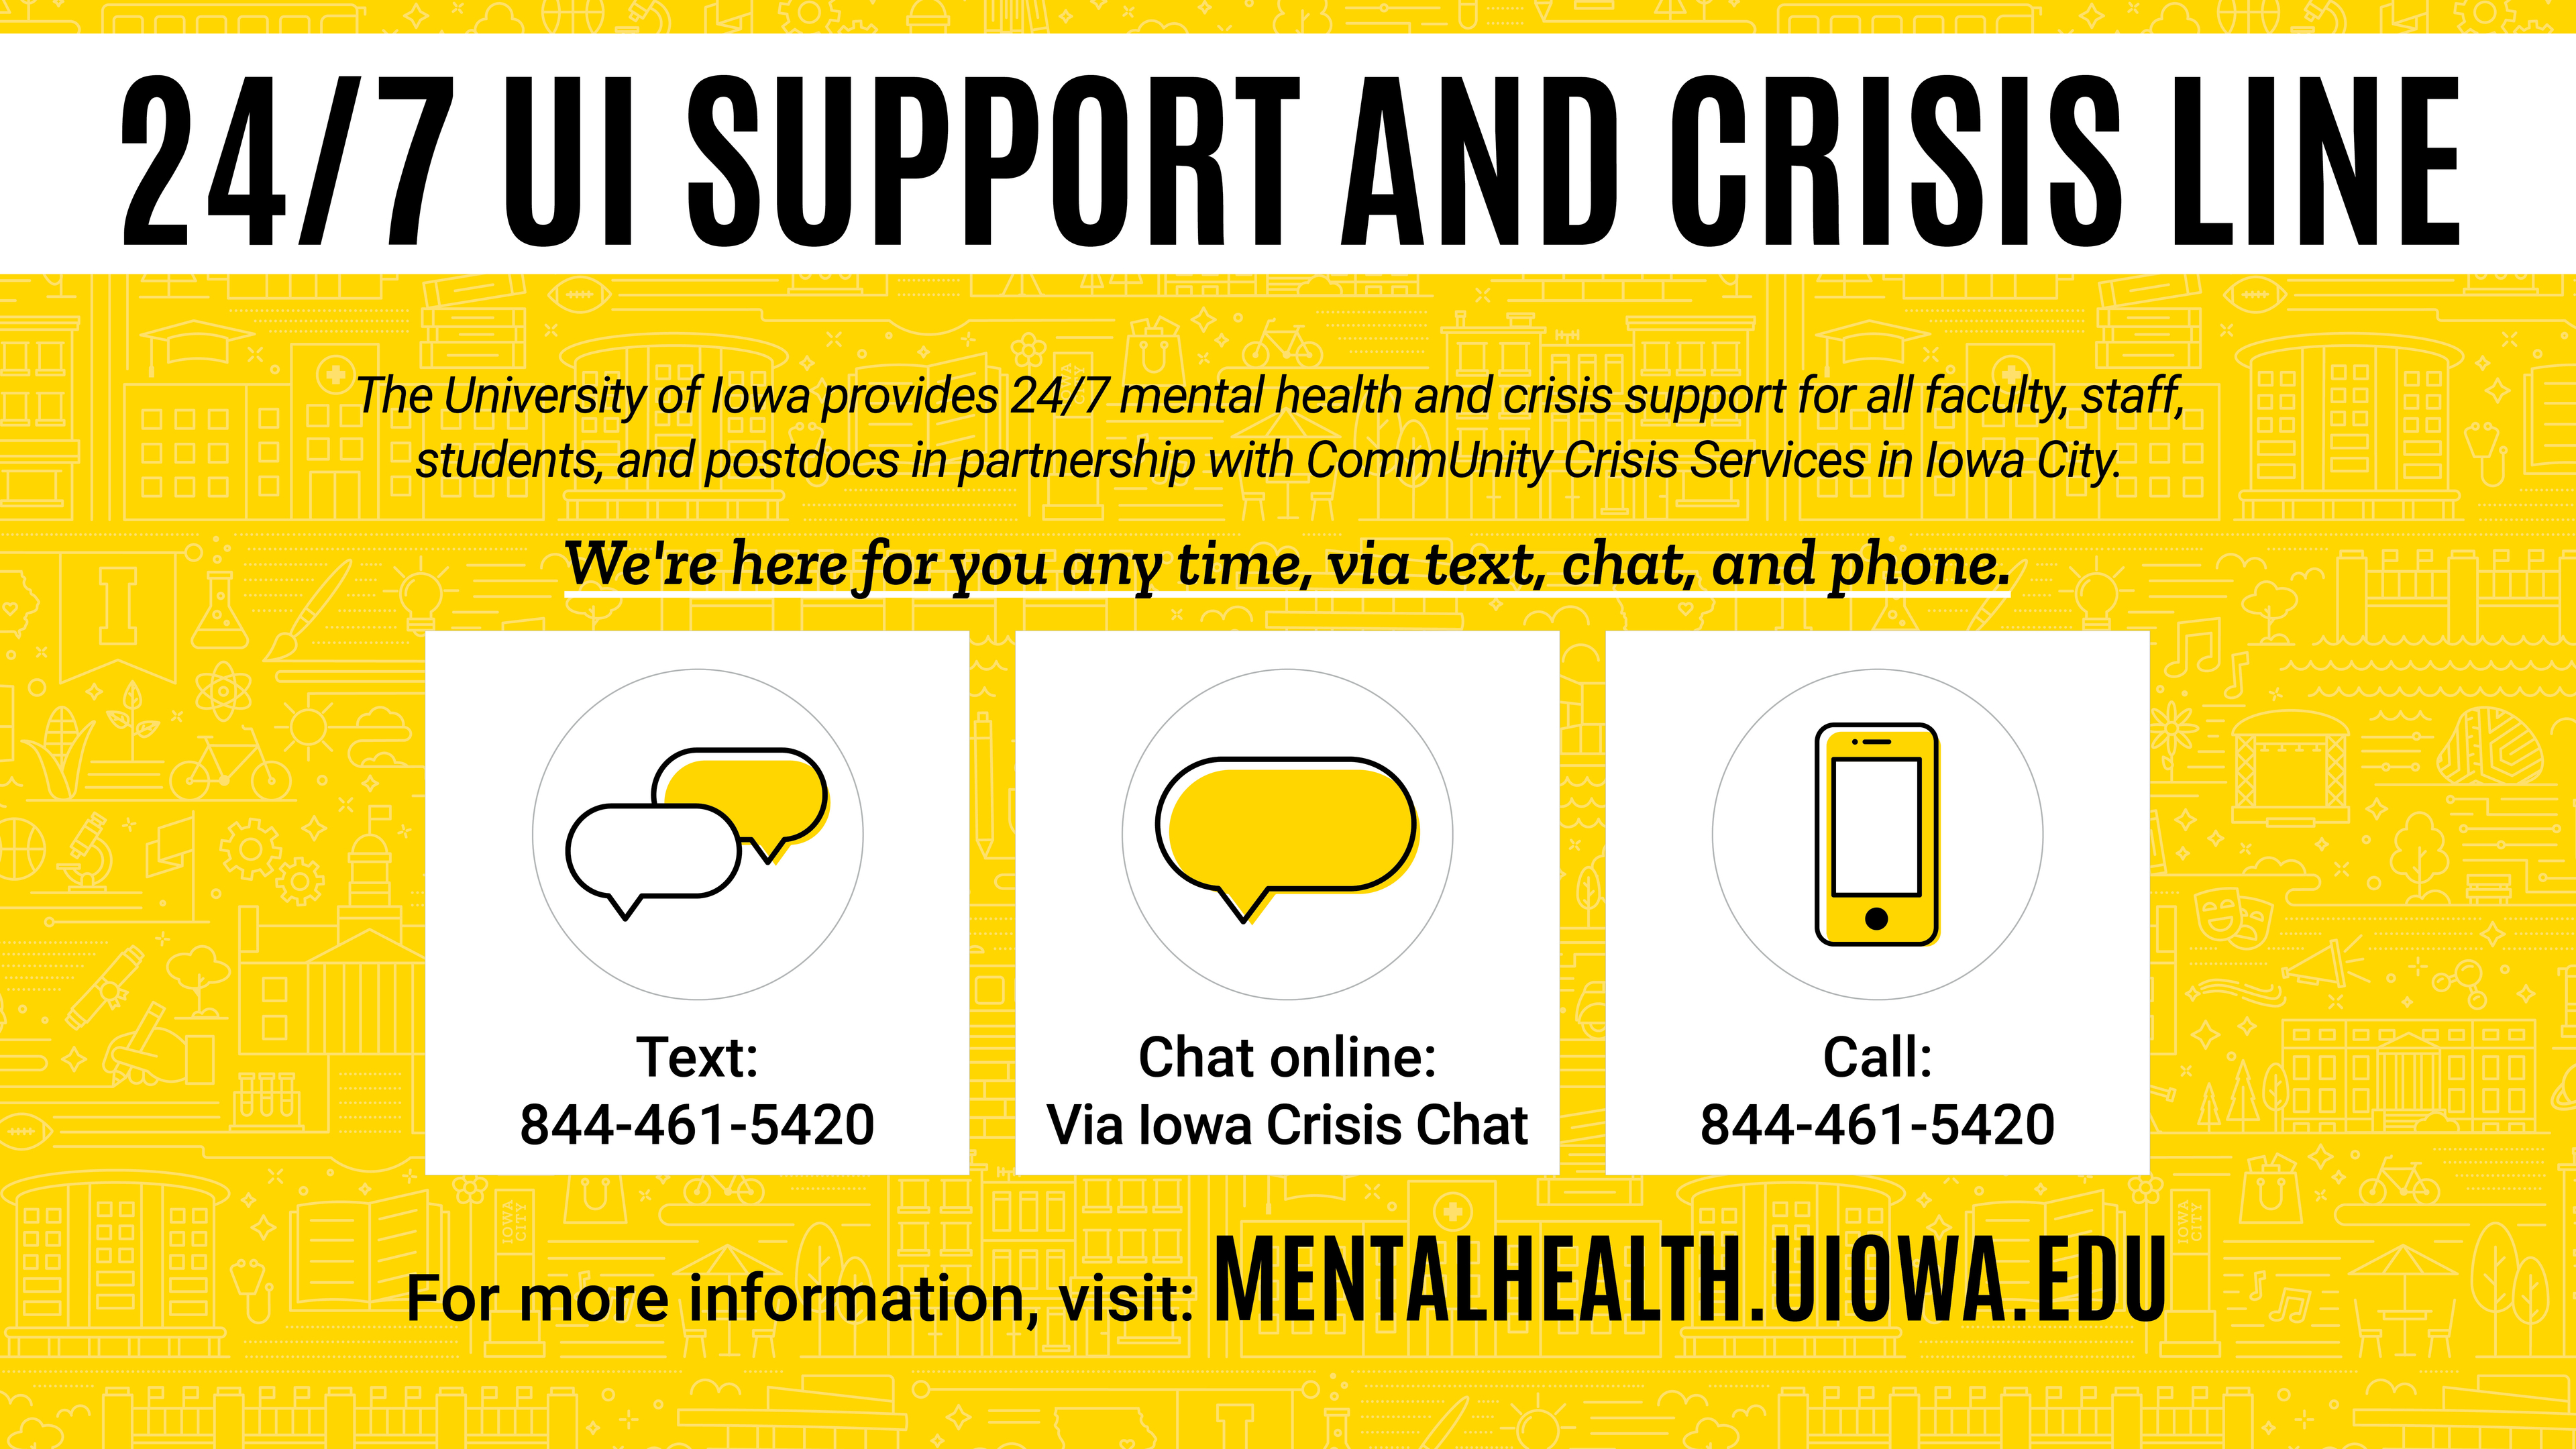 24/7 ui support and crisis line text 844-467-5420 chat online via iowa crisis chat call 844-461-5420